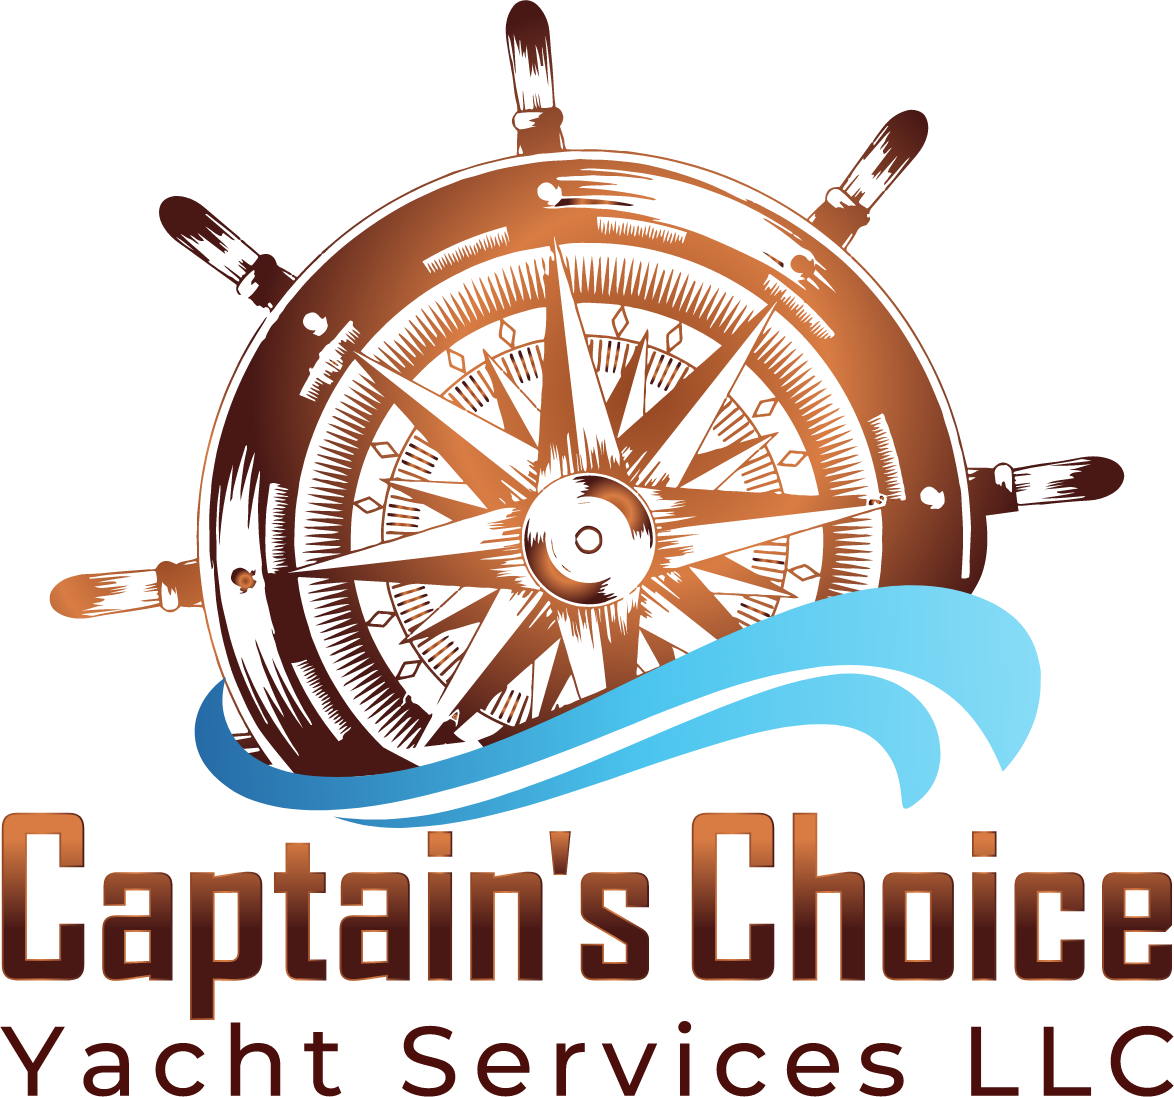 yacht services fort lauderdale